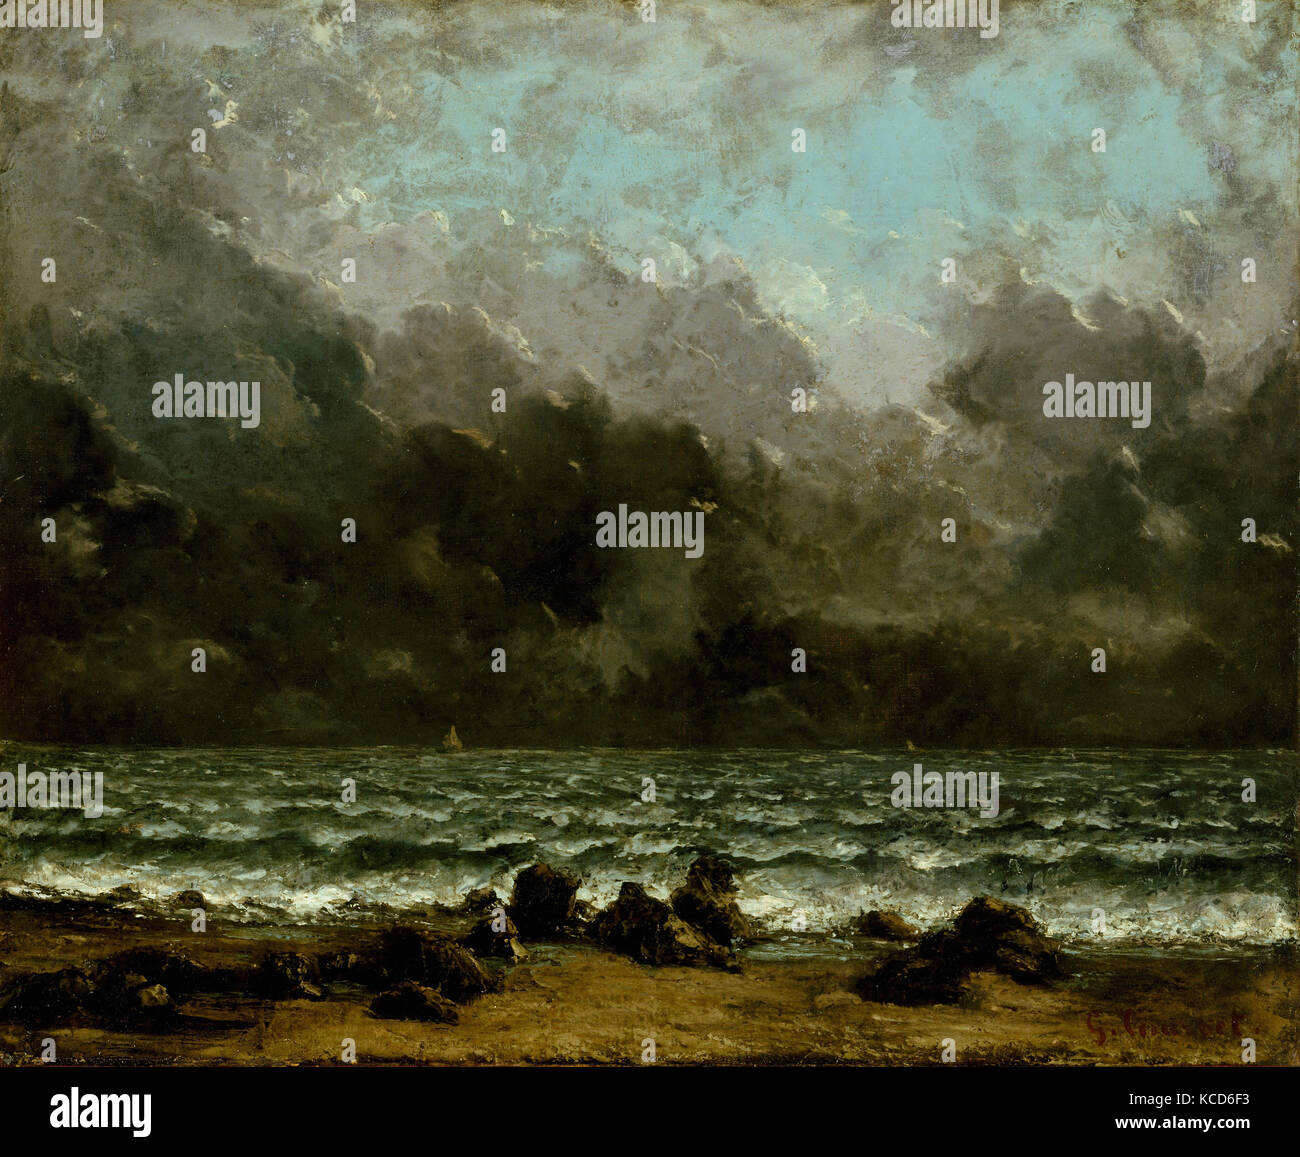 The Sea, 1865 or later, Oil on canvas, 20 x 24 in. (50.8 x 61 cm), Paintings, Gustave Courbet (French, Ornans 1819–1877 La Tour Stock Photo